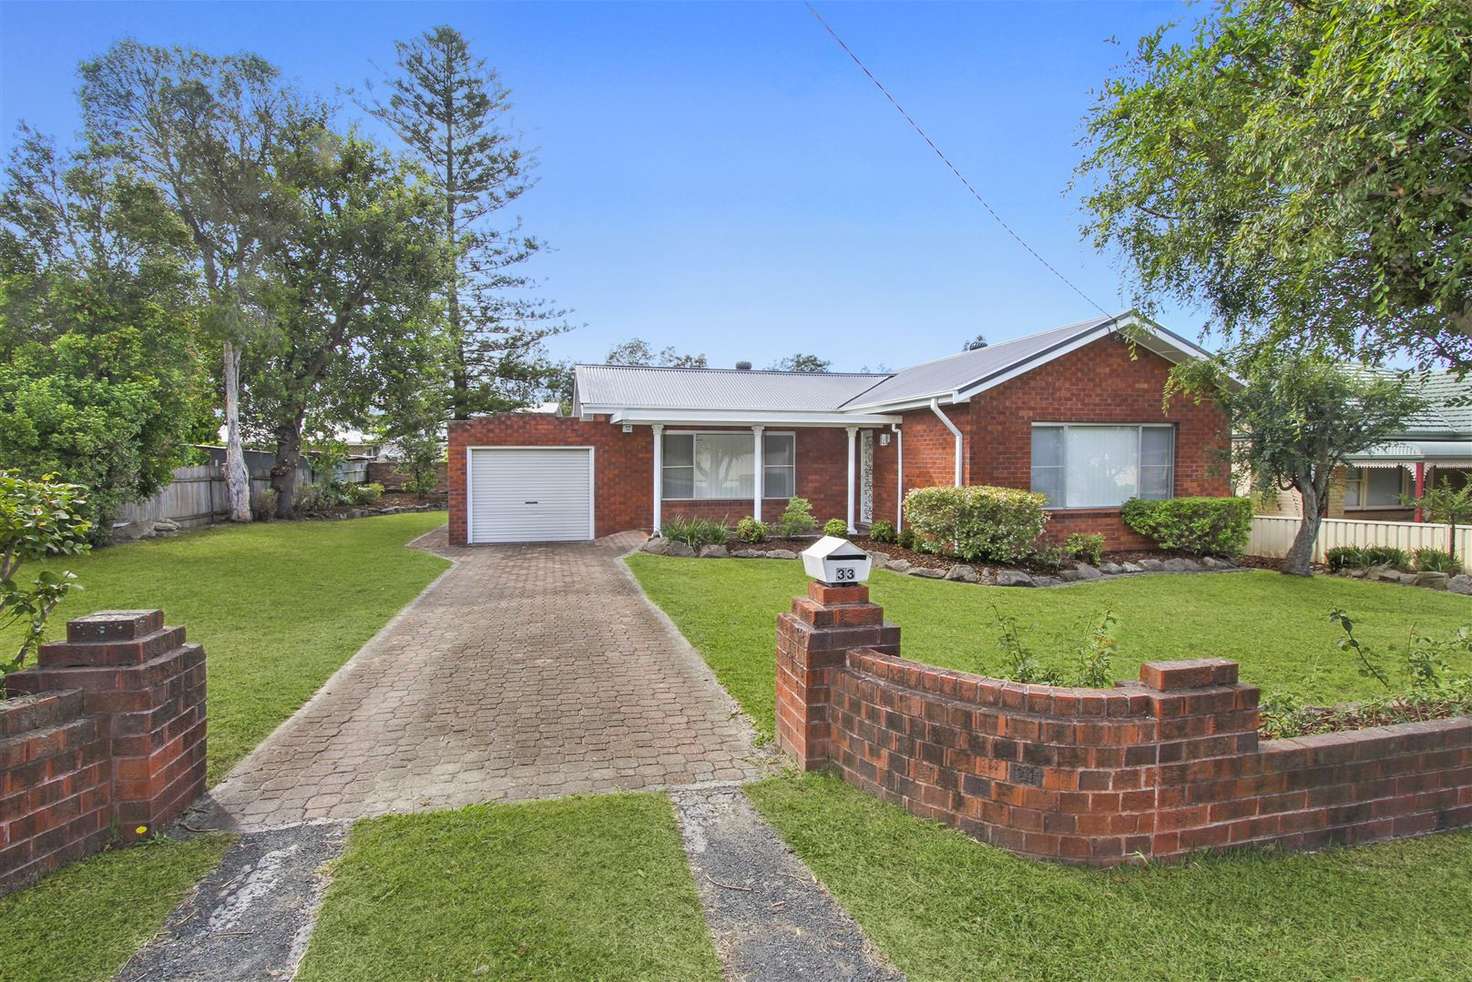 Main view of Homely house listing, 33 Mulda Street, Dapto NSW 2530